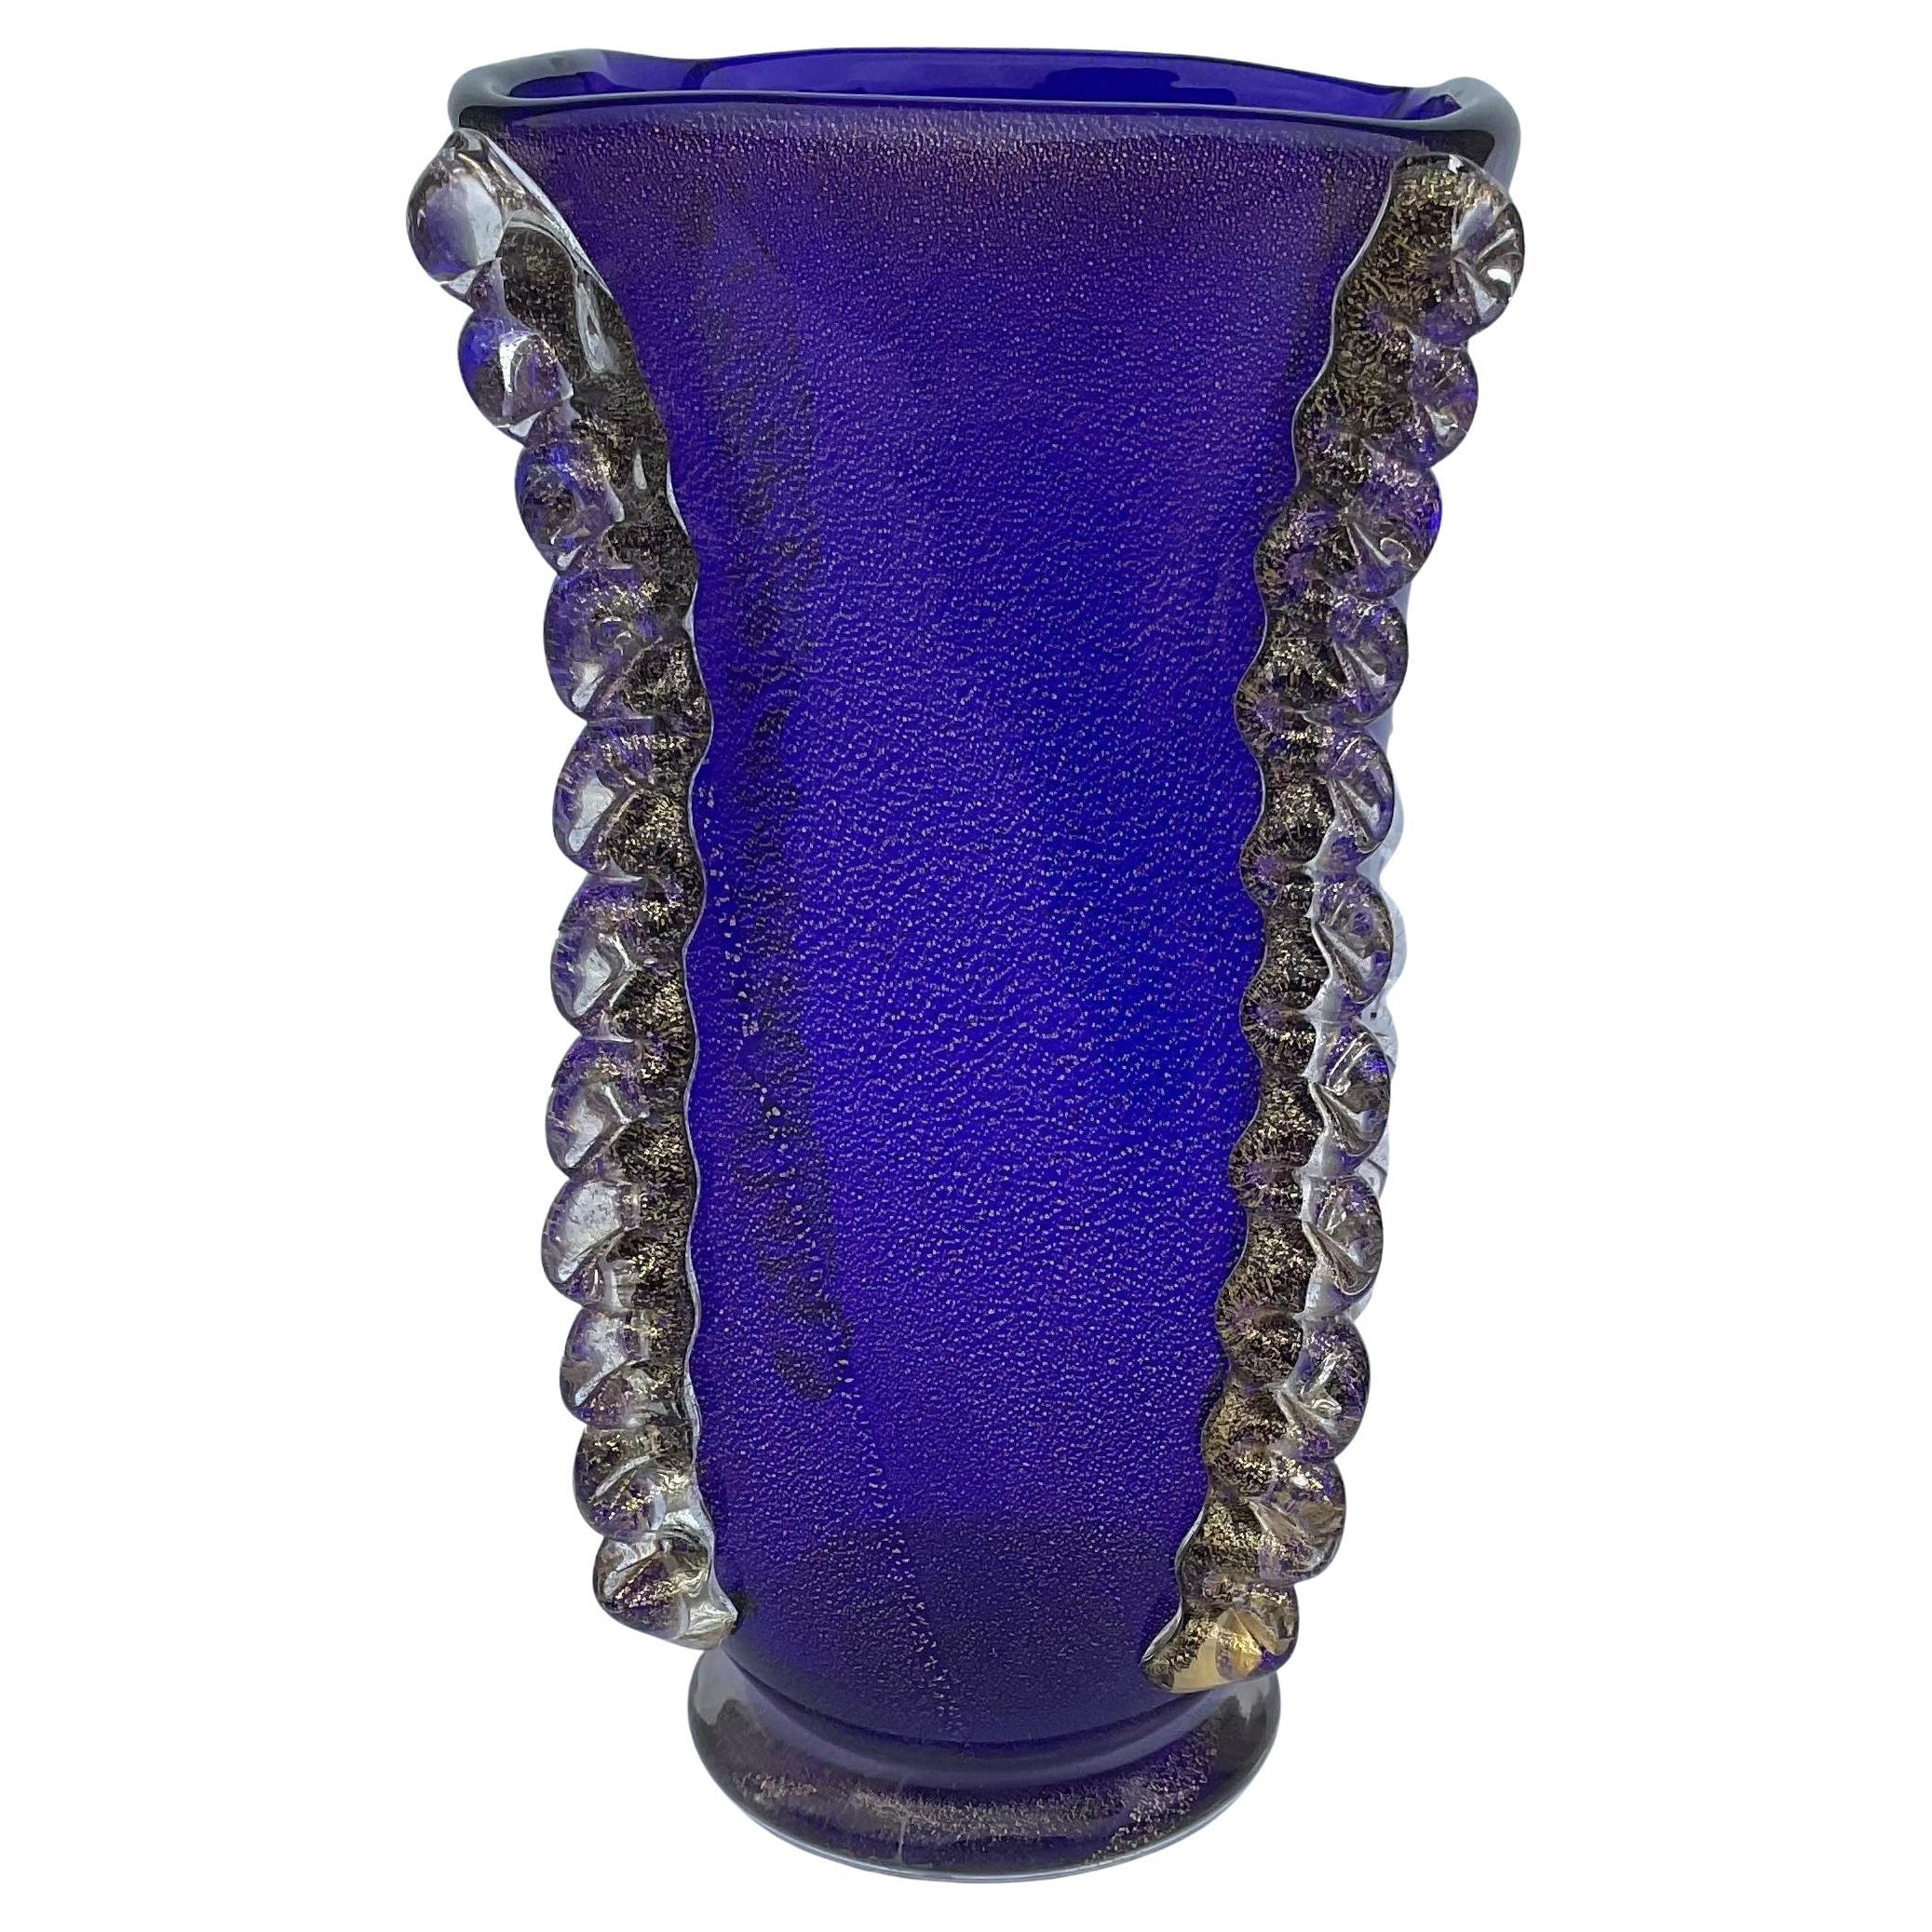 Franco Schiavon Vibrant Blue Murano Art Glass Vase with Gold Handles and Dust